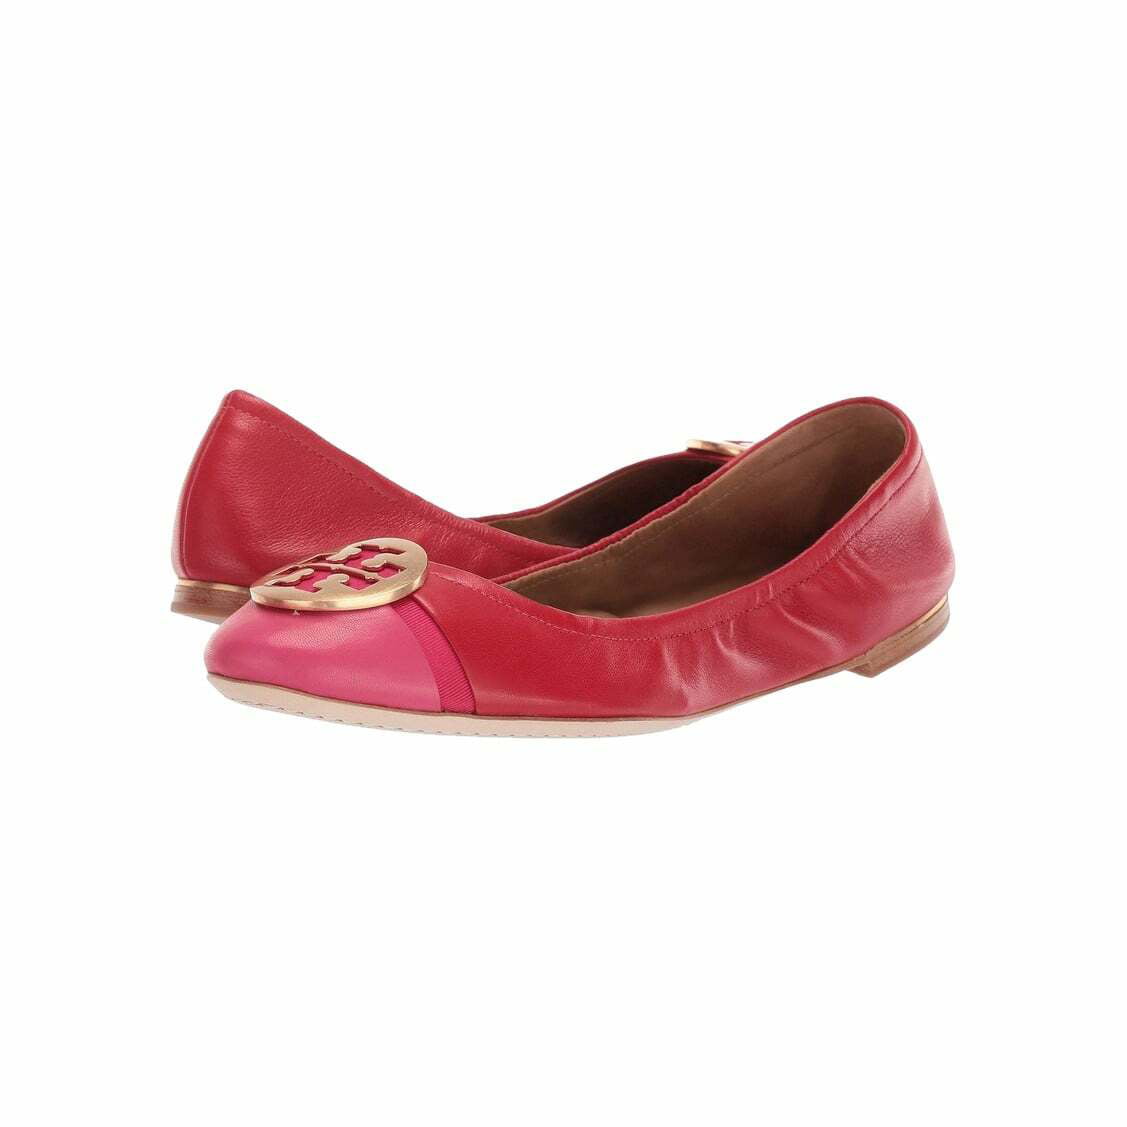 Tory Burch Brilliant Red Minnie Cap-Toe Women's Leather Ballet Flats Shoes  